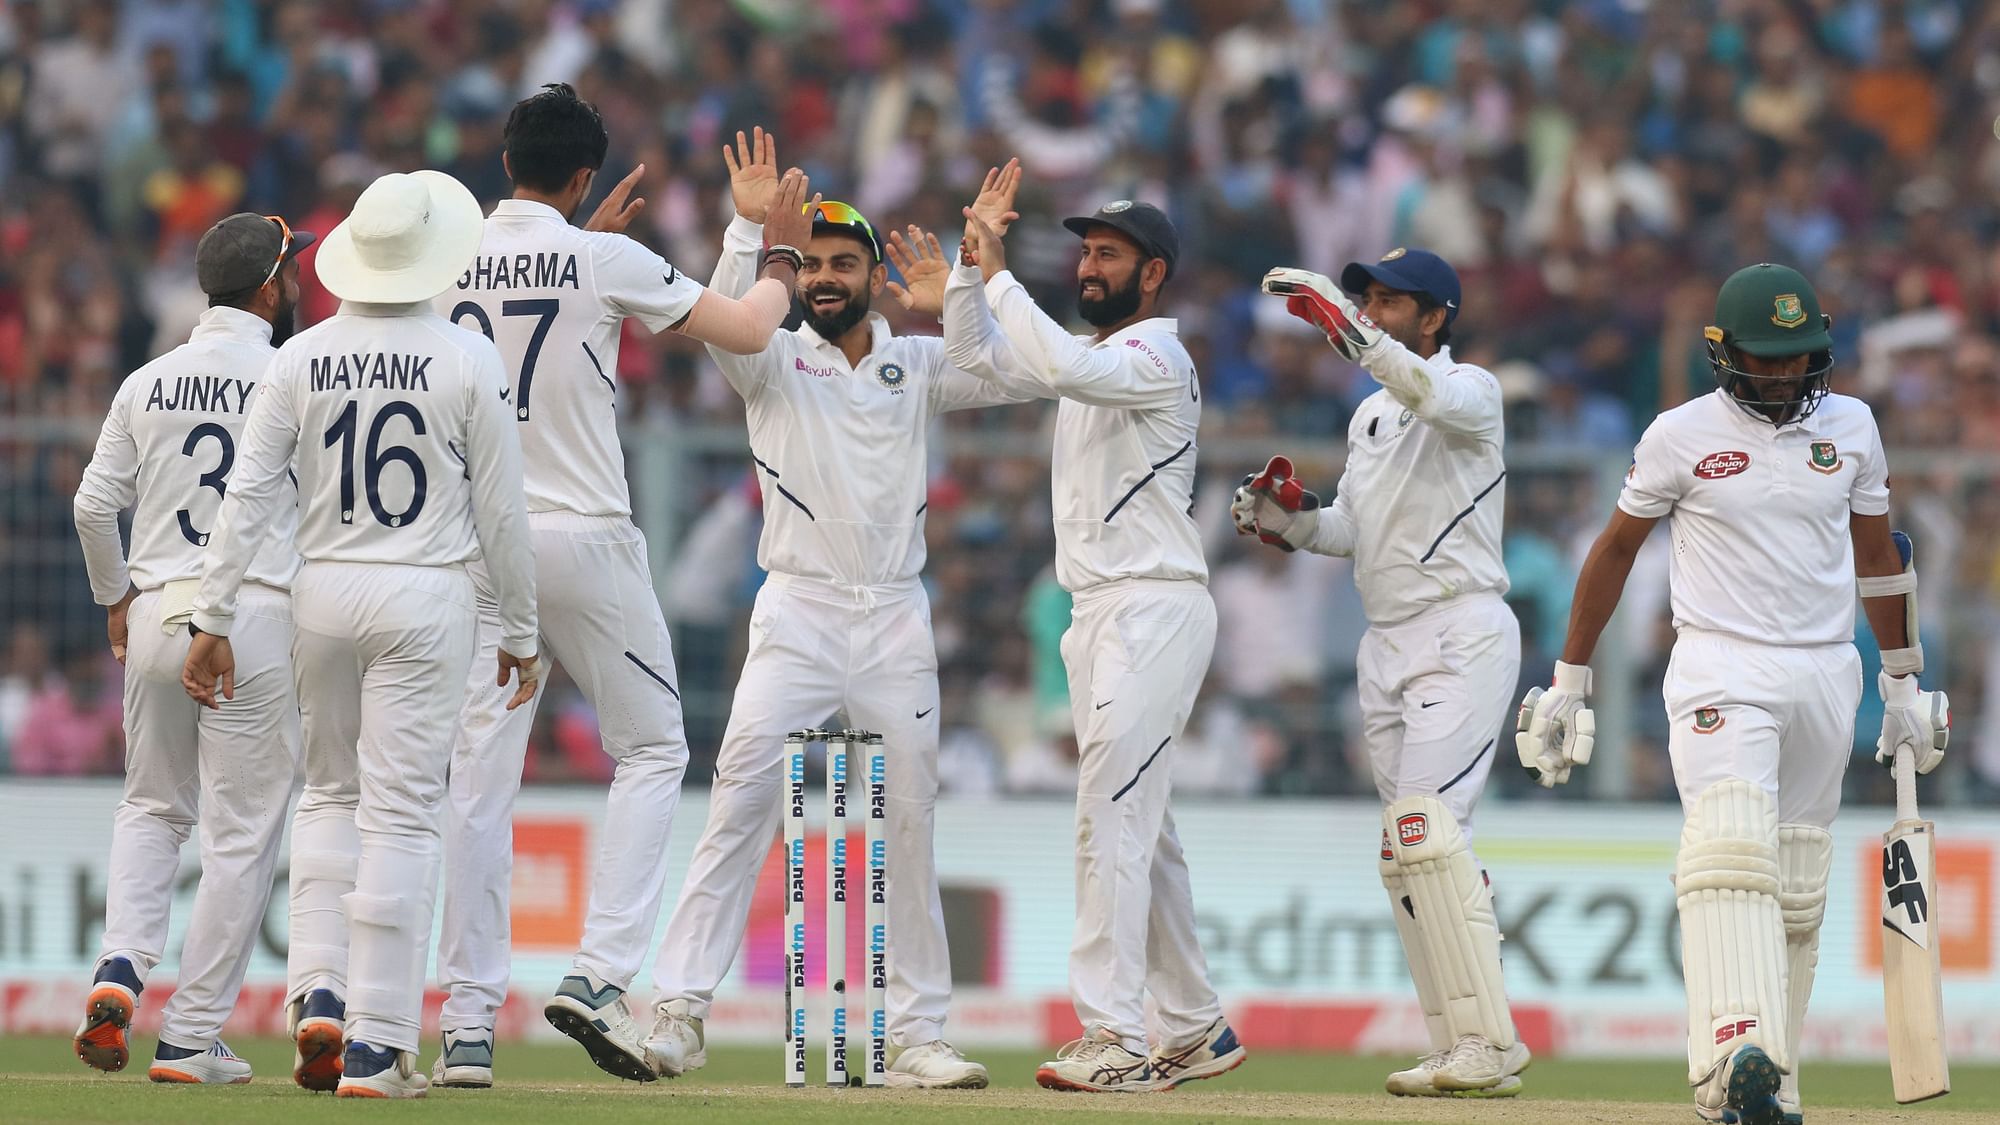 India reached 174/3 at stumps on Day 1 of the first pink ball Test in the country in Kolkata on Friday.